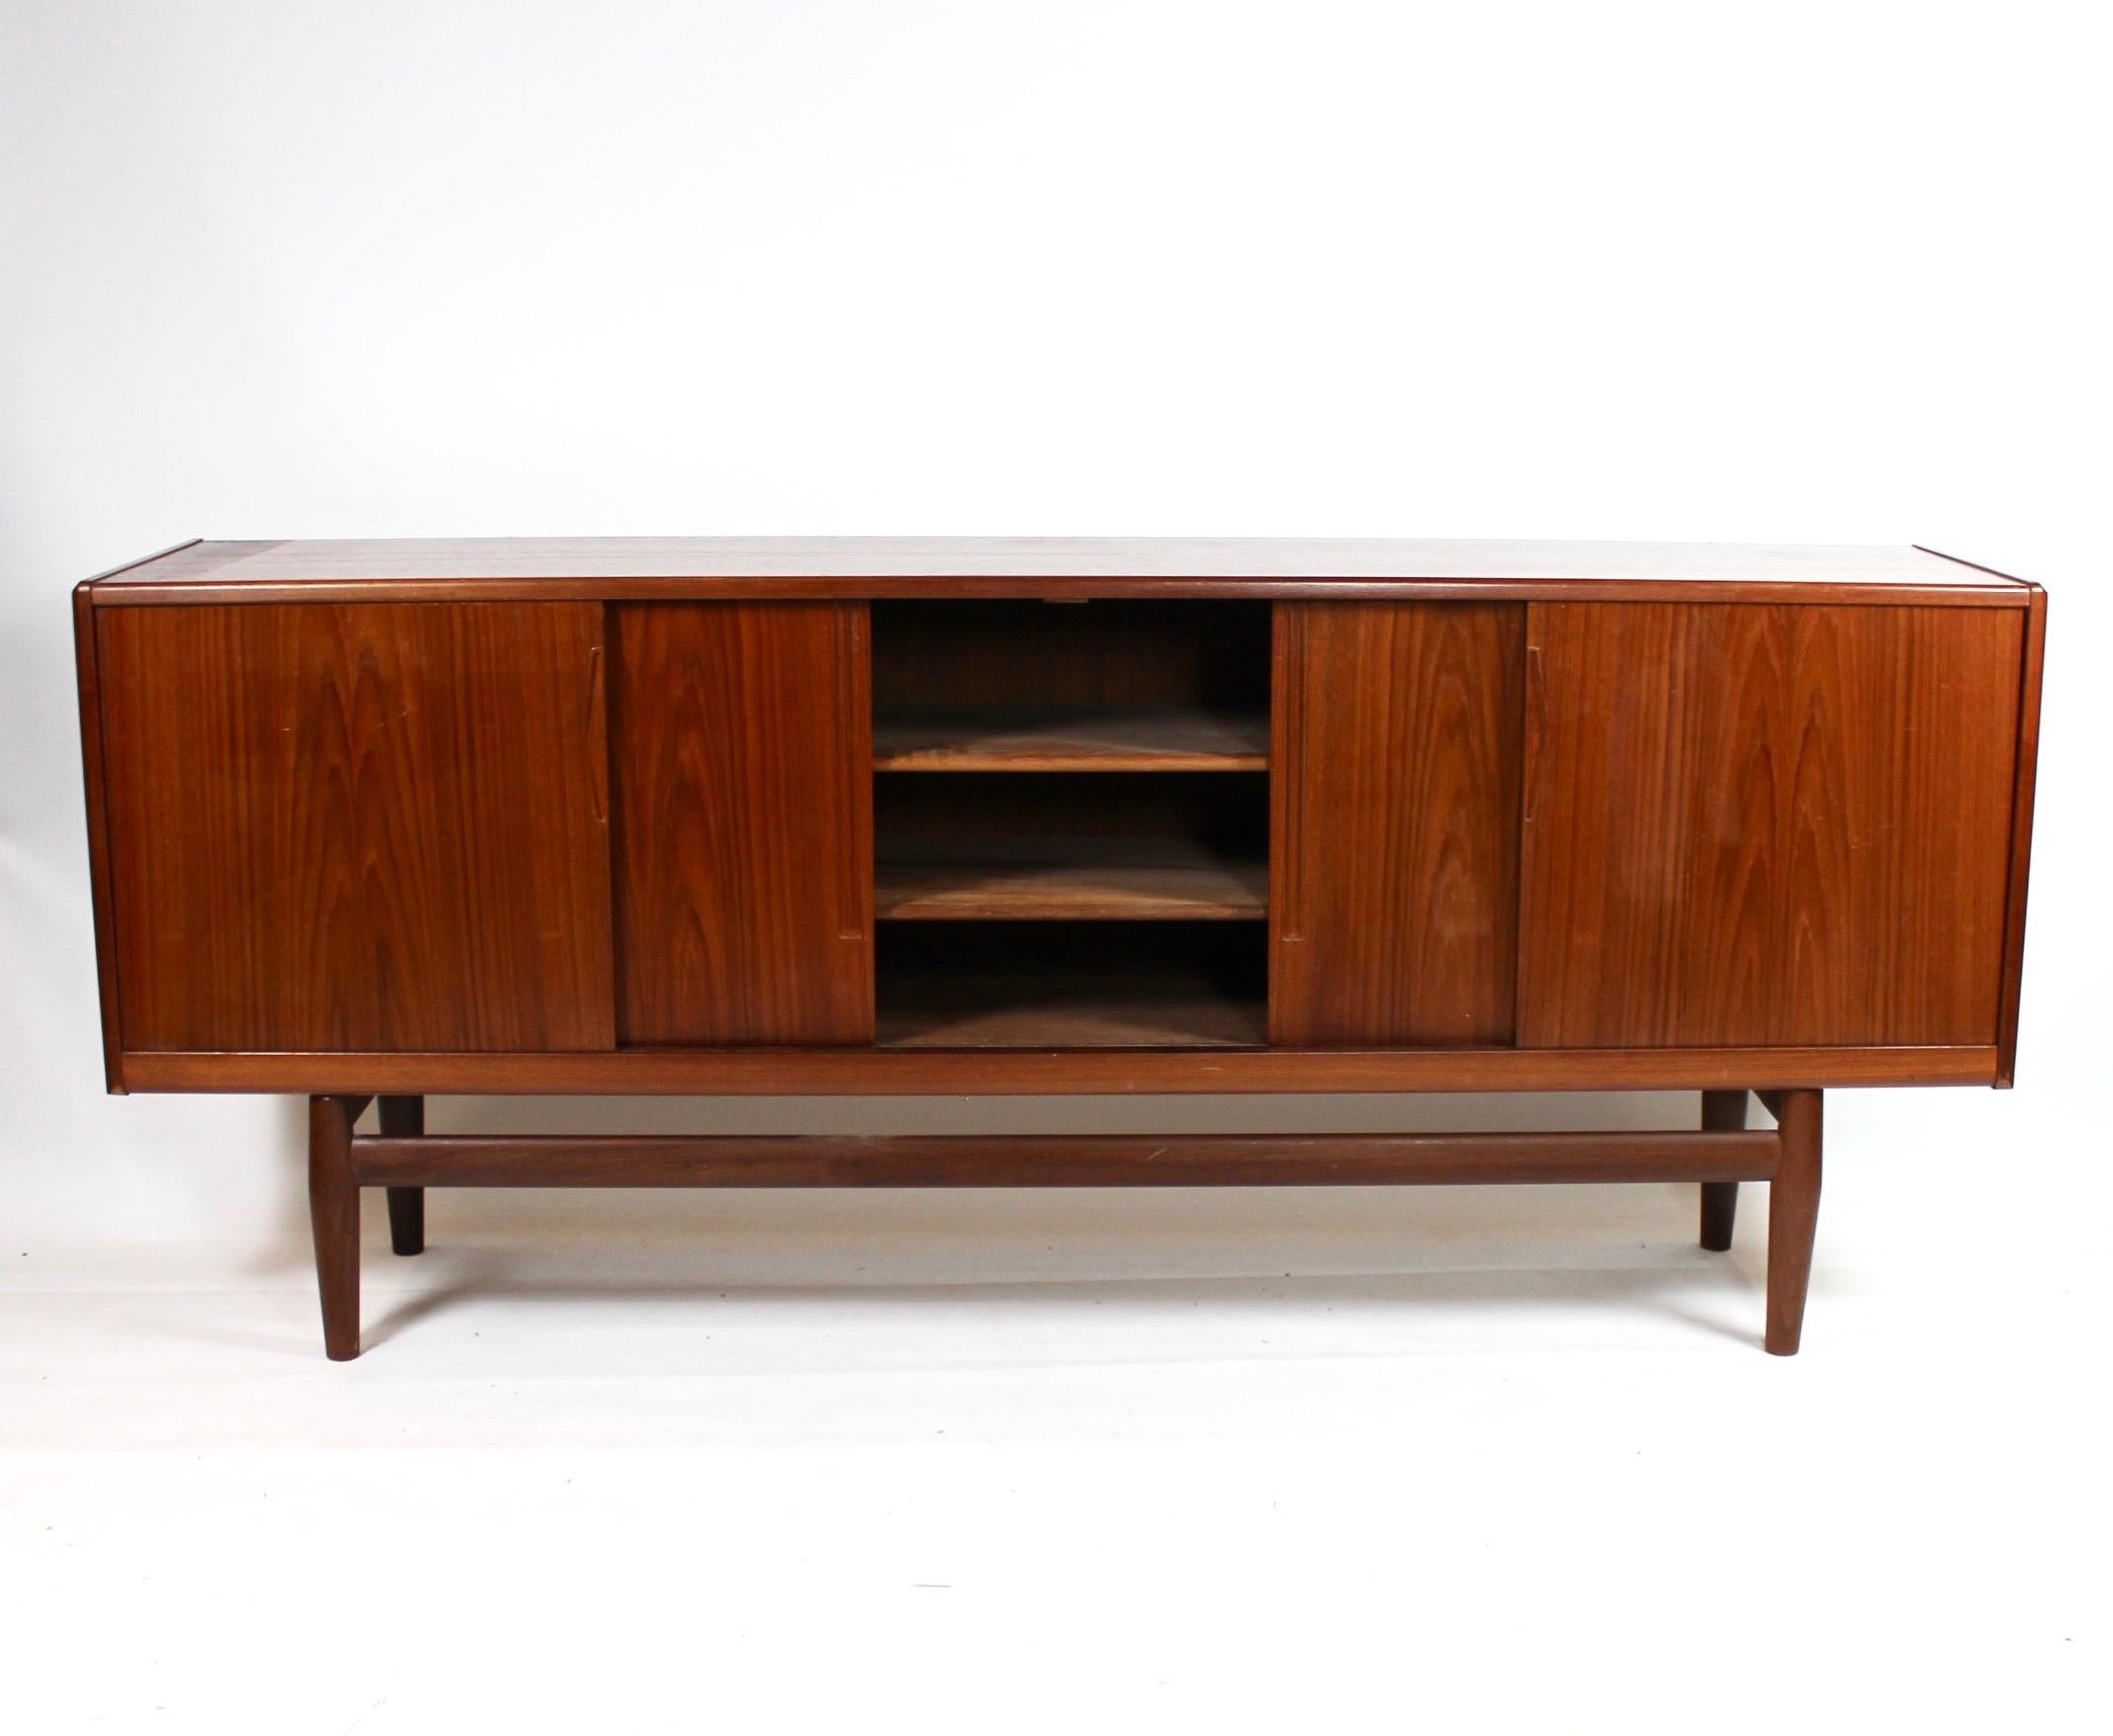 Exquisite Danish Design Sideboard in Teak from the 1960s: A striking testament to the elegance and craftsmanship of mid-century Danish furniture.

Crafted from teak, this sideboard embodies the iconic design principles of the 1960s Danish modern